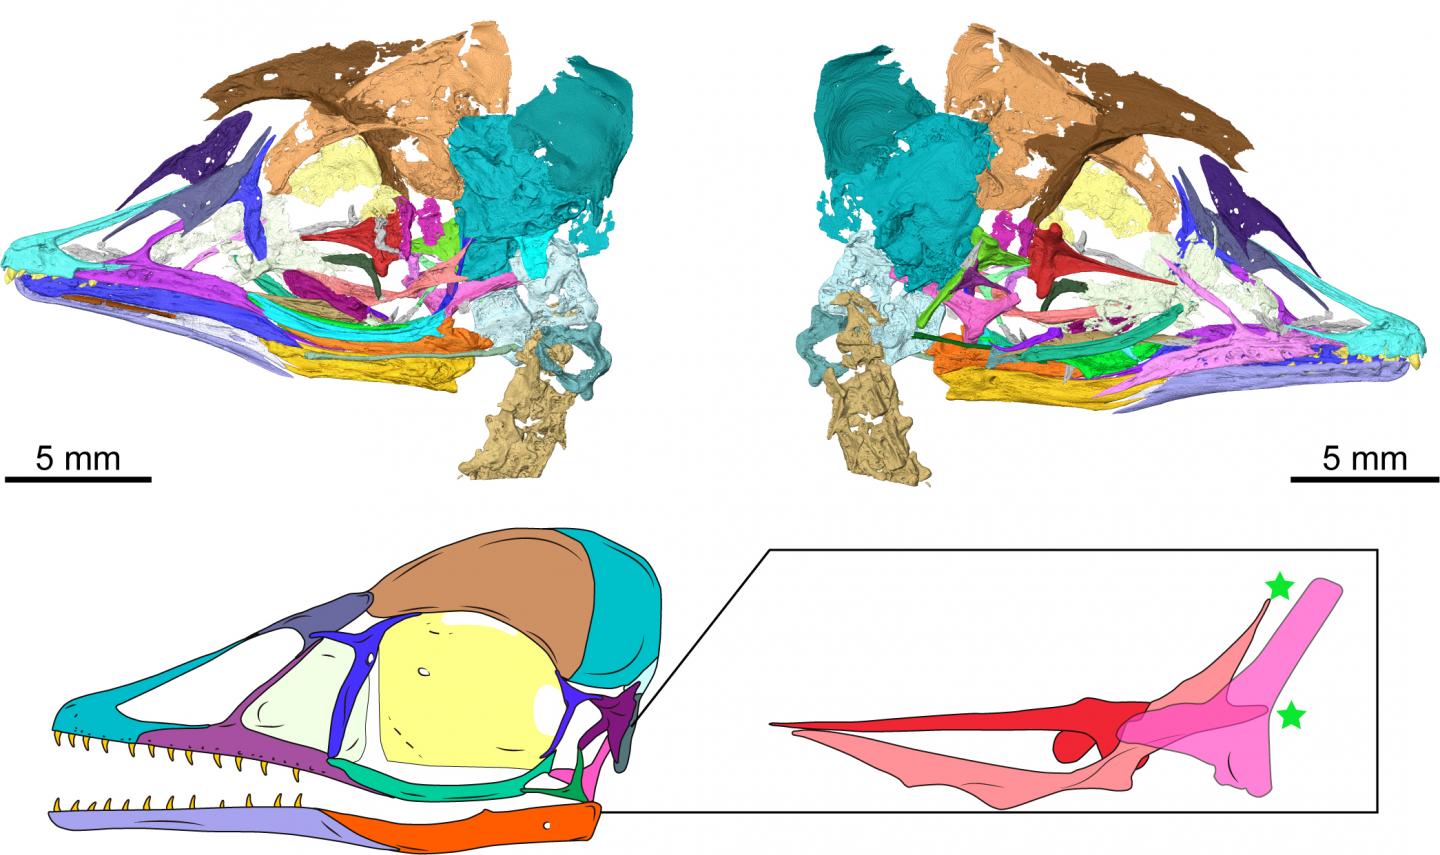 Digital reconstruction of the new Mesozoic bird skull with expanded detail of the dinosaur-like palatal bones